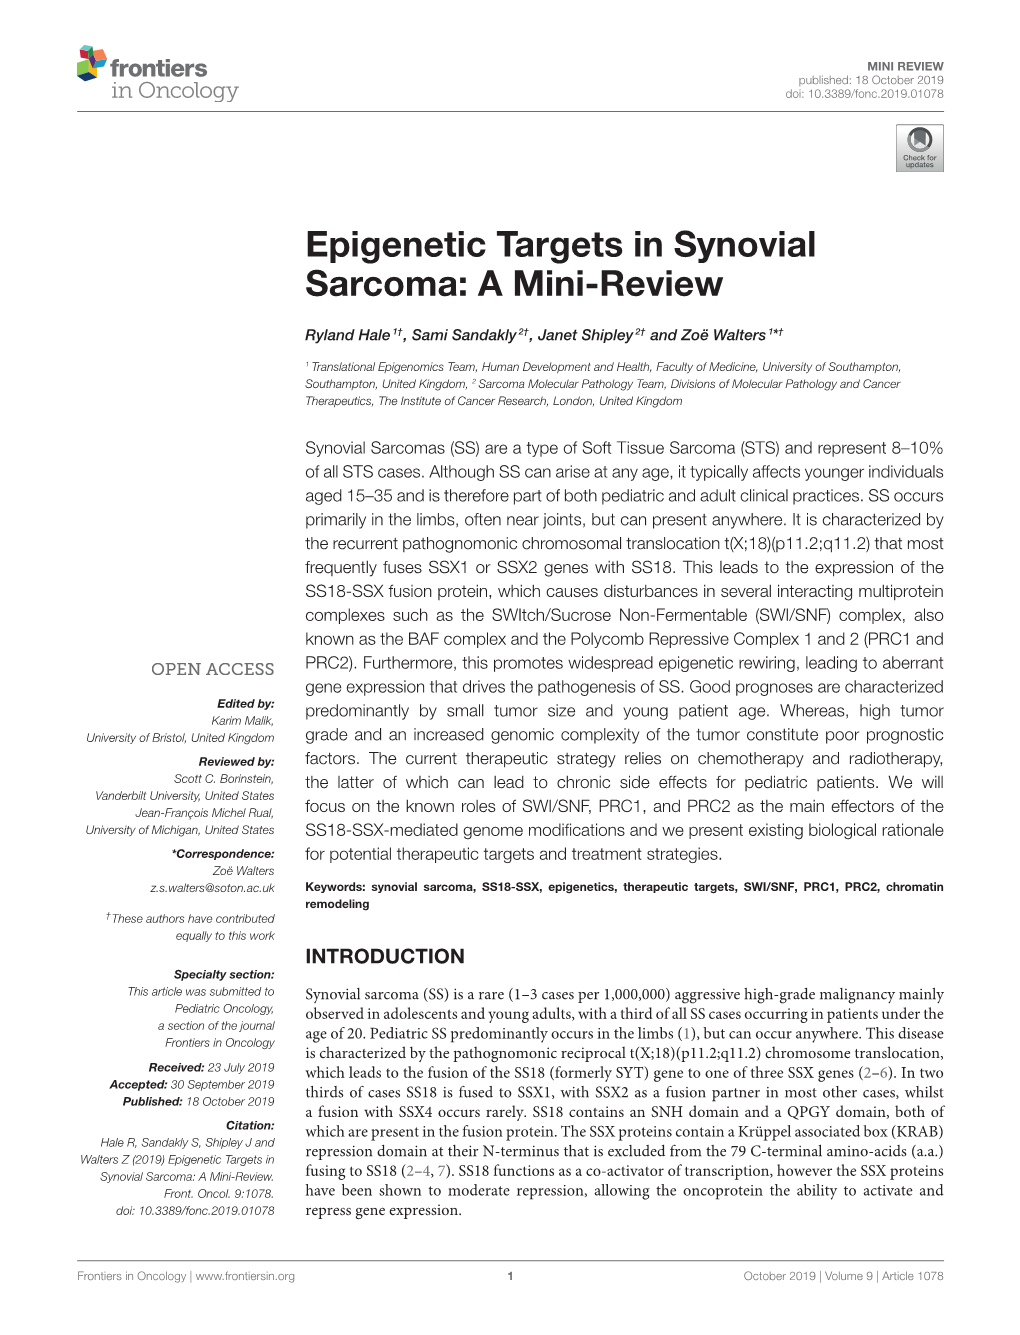 Epigenetic Targets in Synovial Sarcoma: a Mini-Review